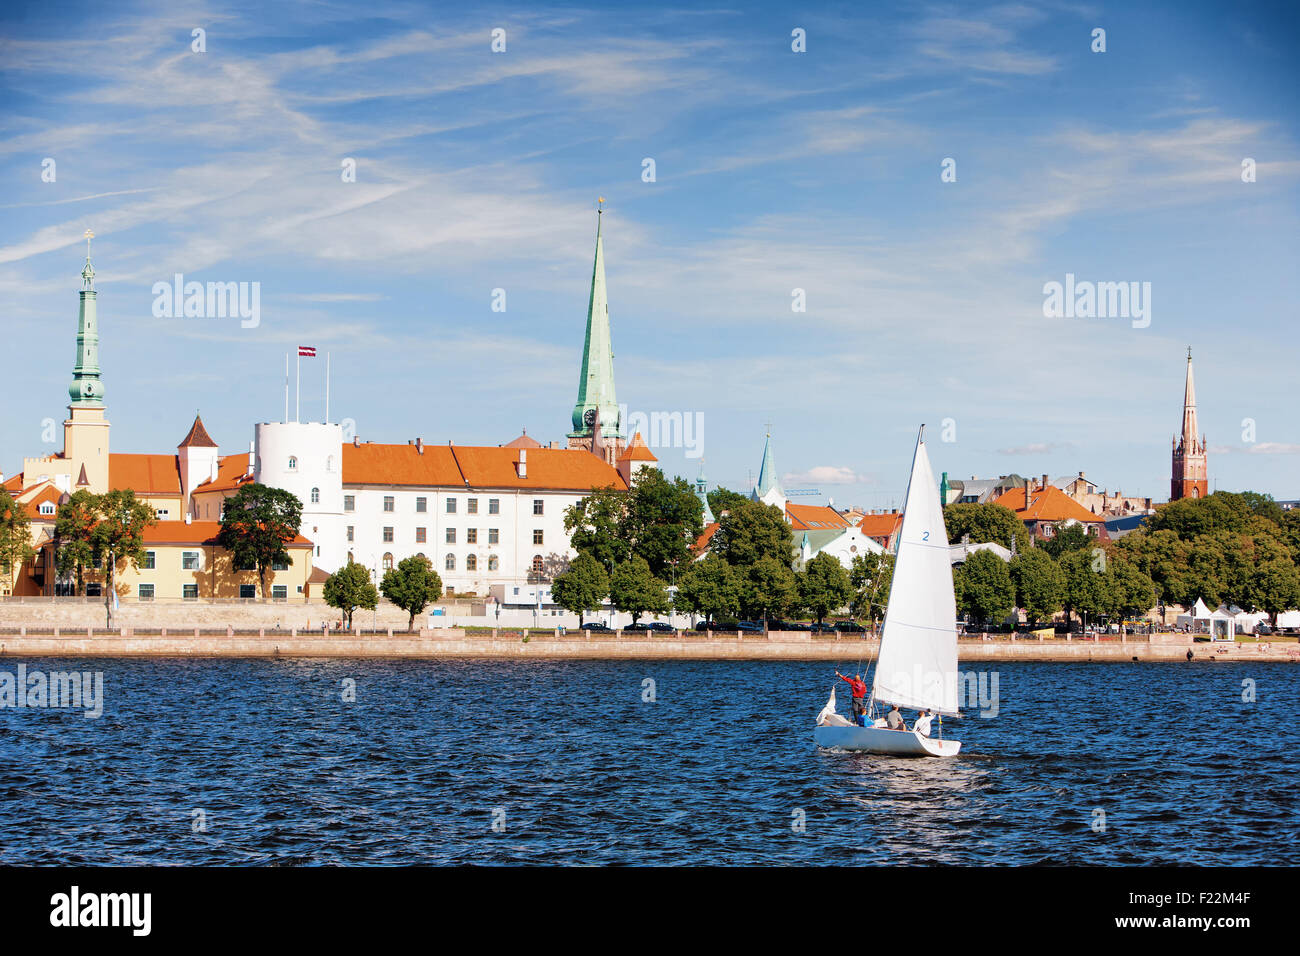 The boat on the river from the castle President of Latvia on the waterfront and city skyline Riga churches with spiers Stock Photo